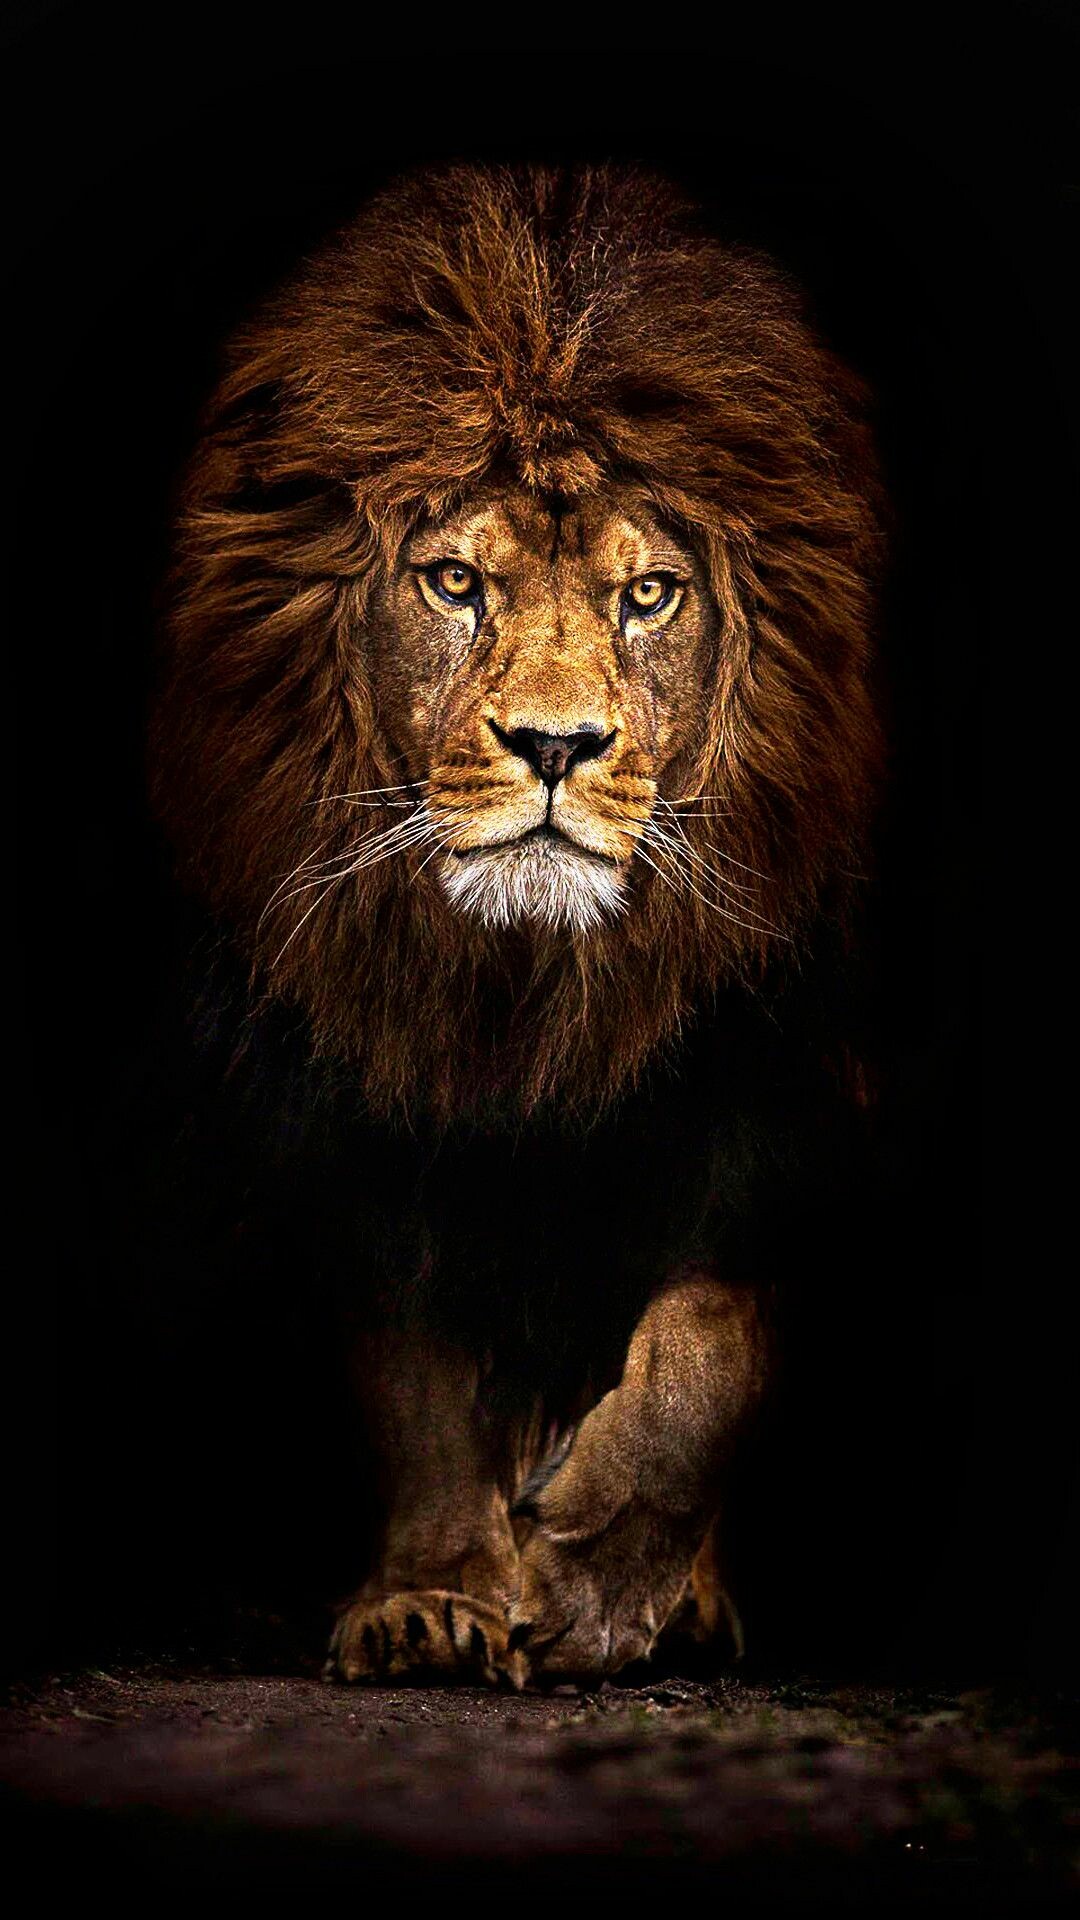 Lion: The length and color of a lion's mane is likely determined by age, genetics, and hormones. 1080x1920 Full HD Background.